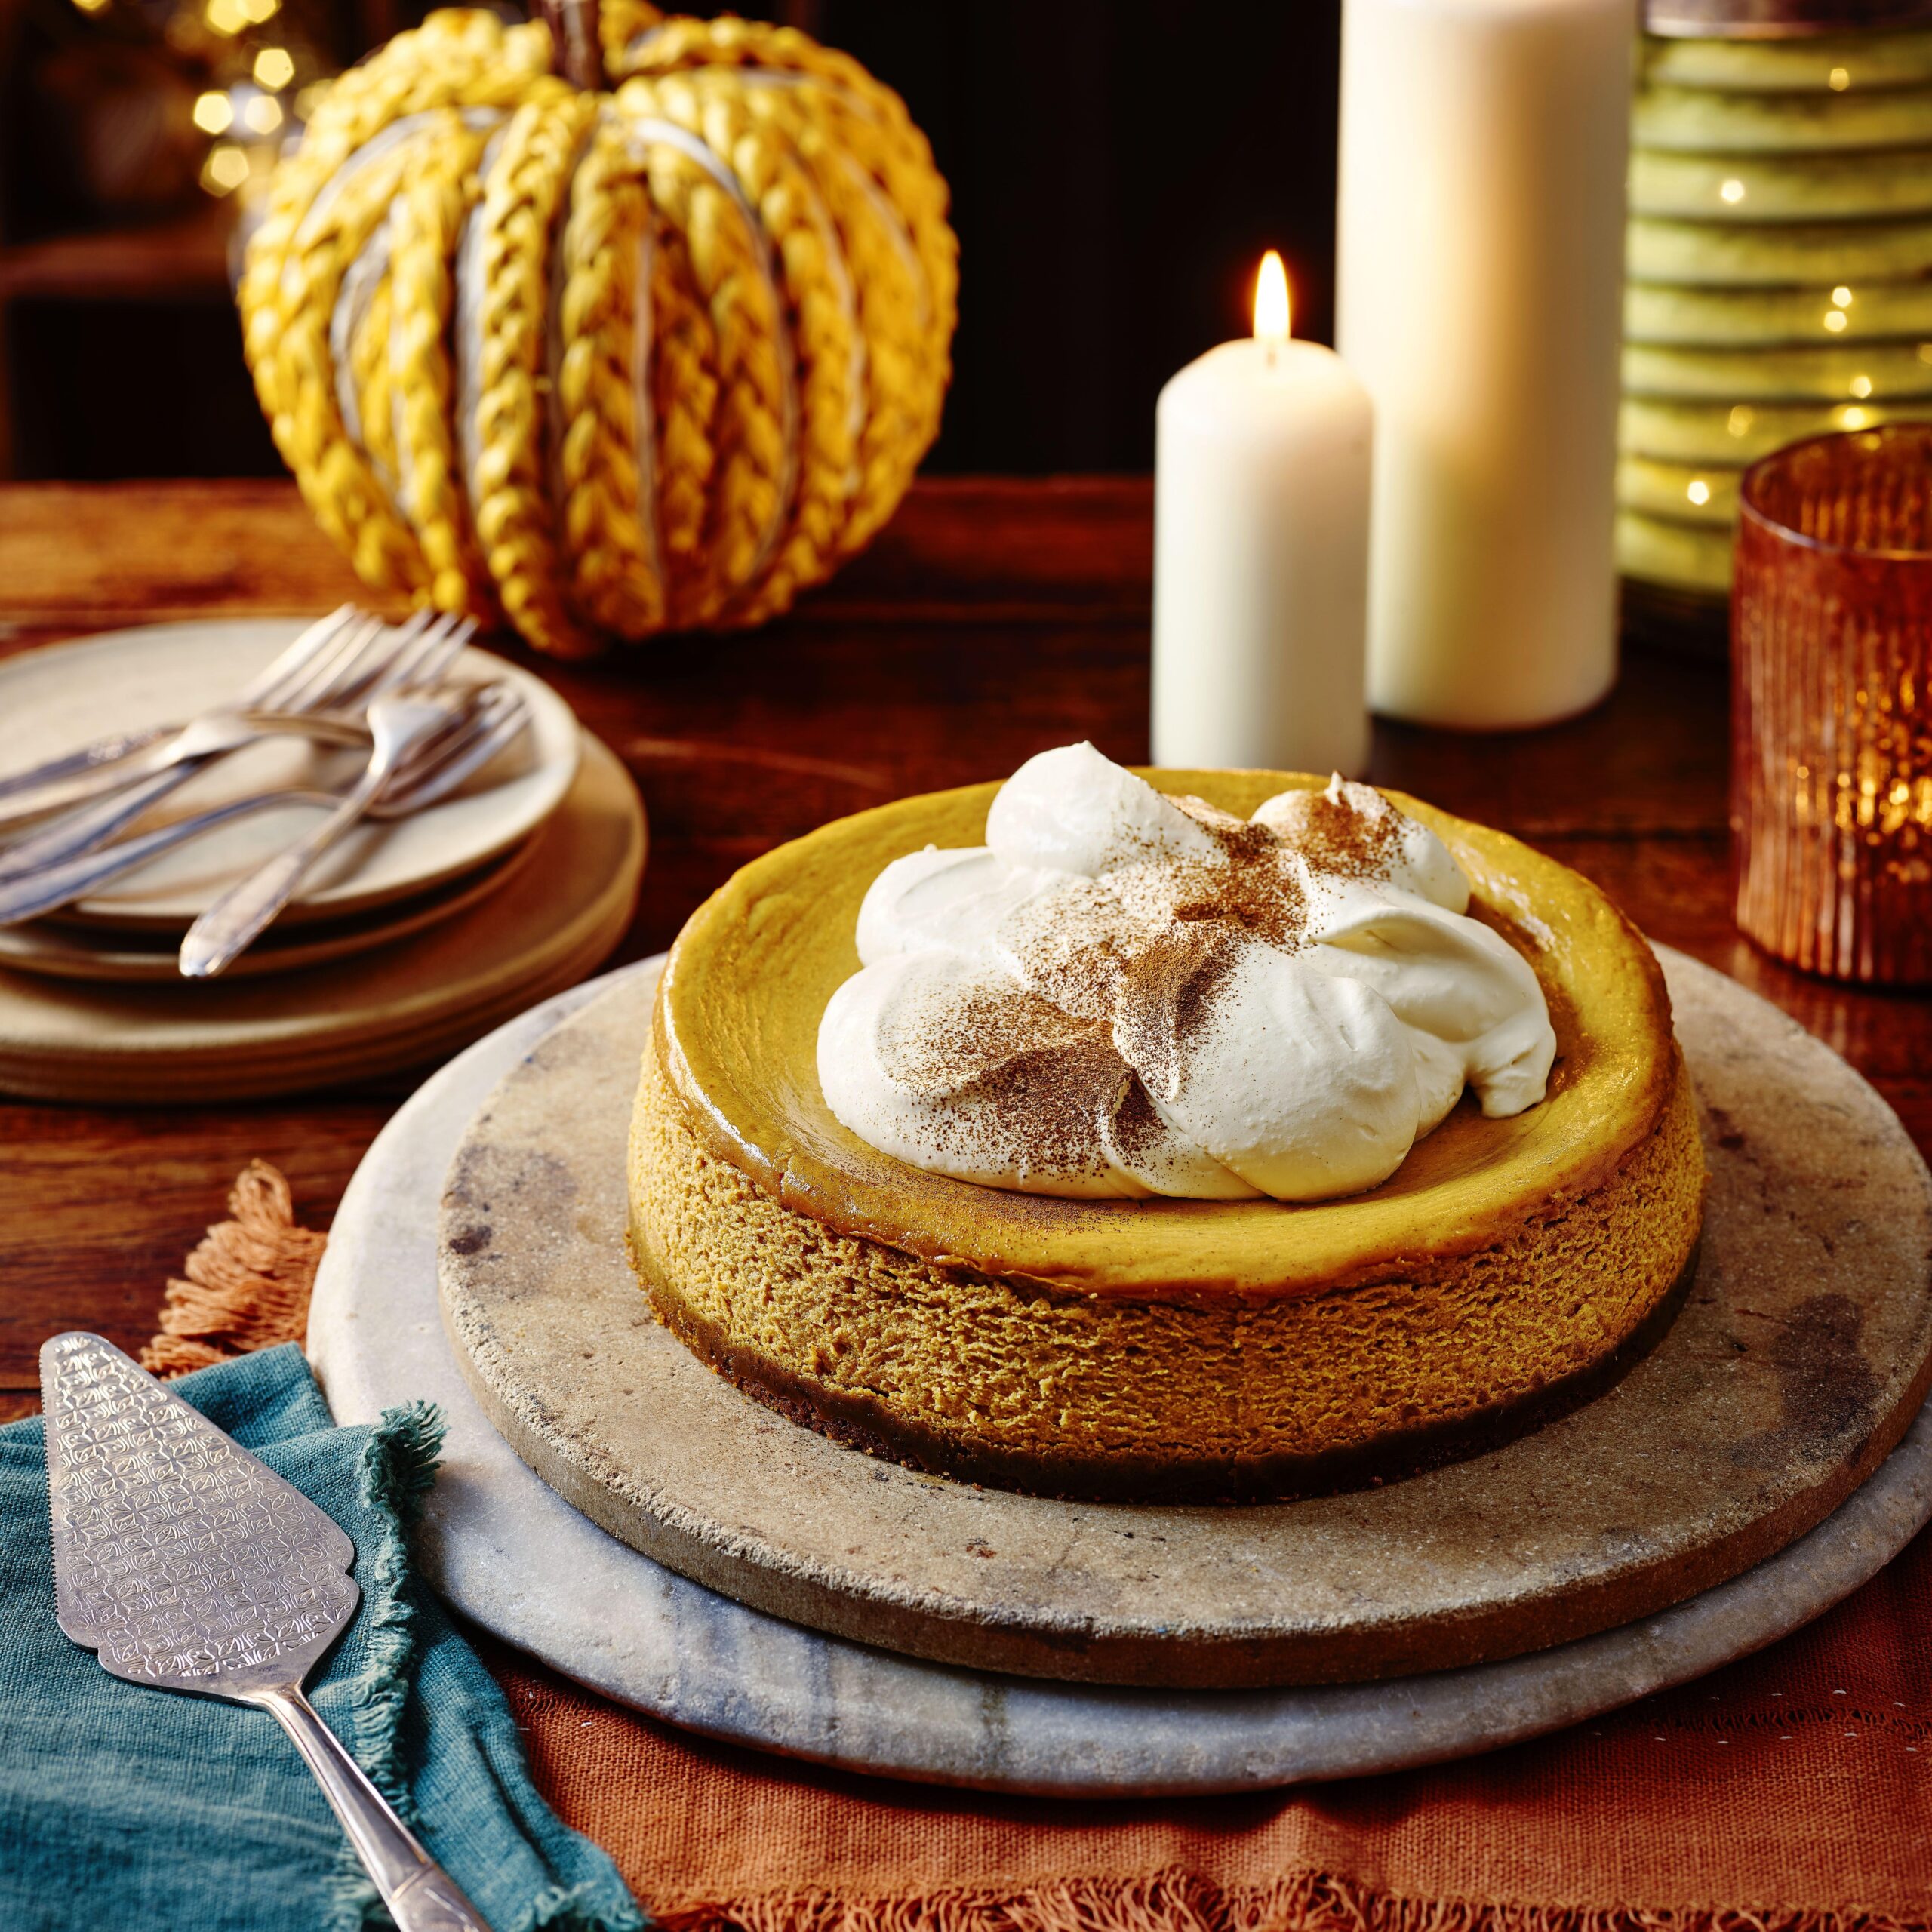  Indulge in all the fall flavors with this creamy pumpkin cheesecake latte.